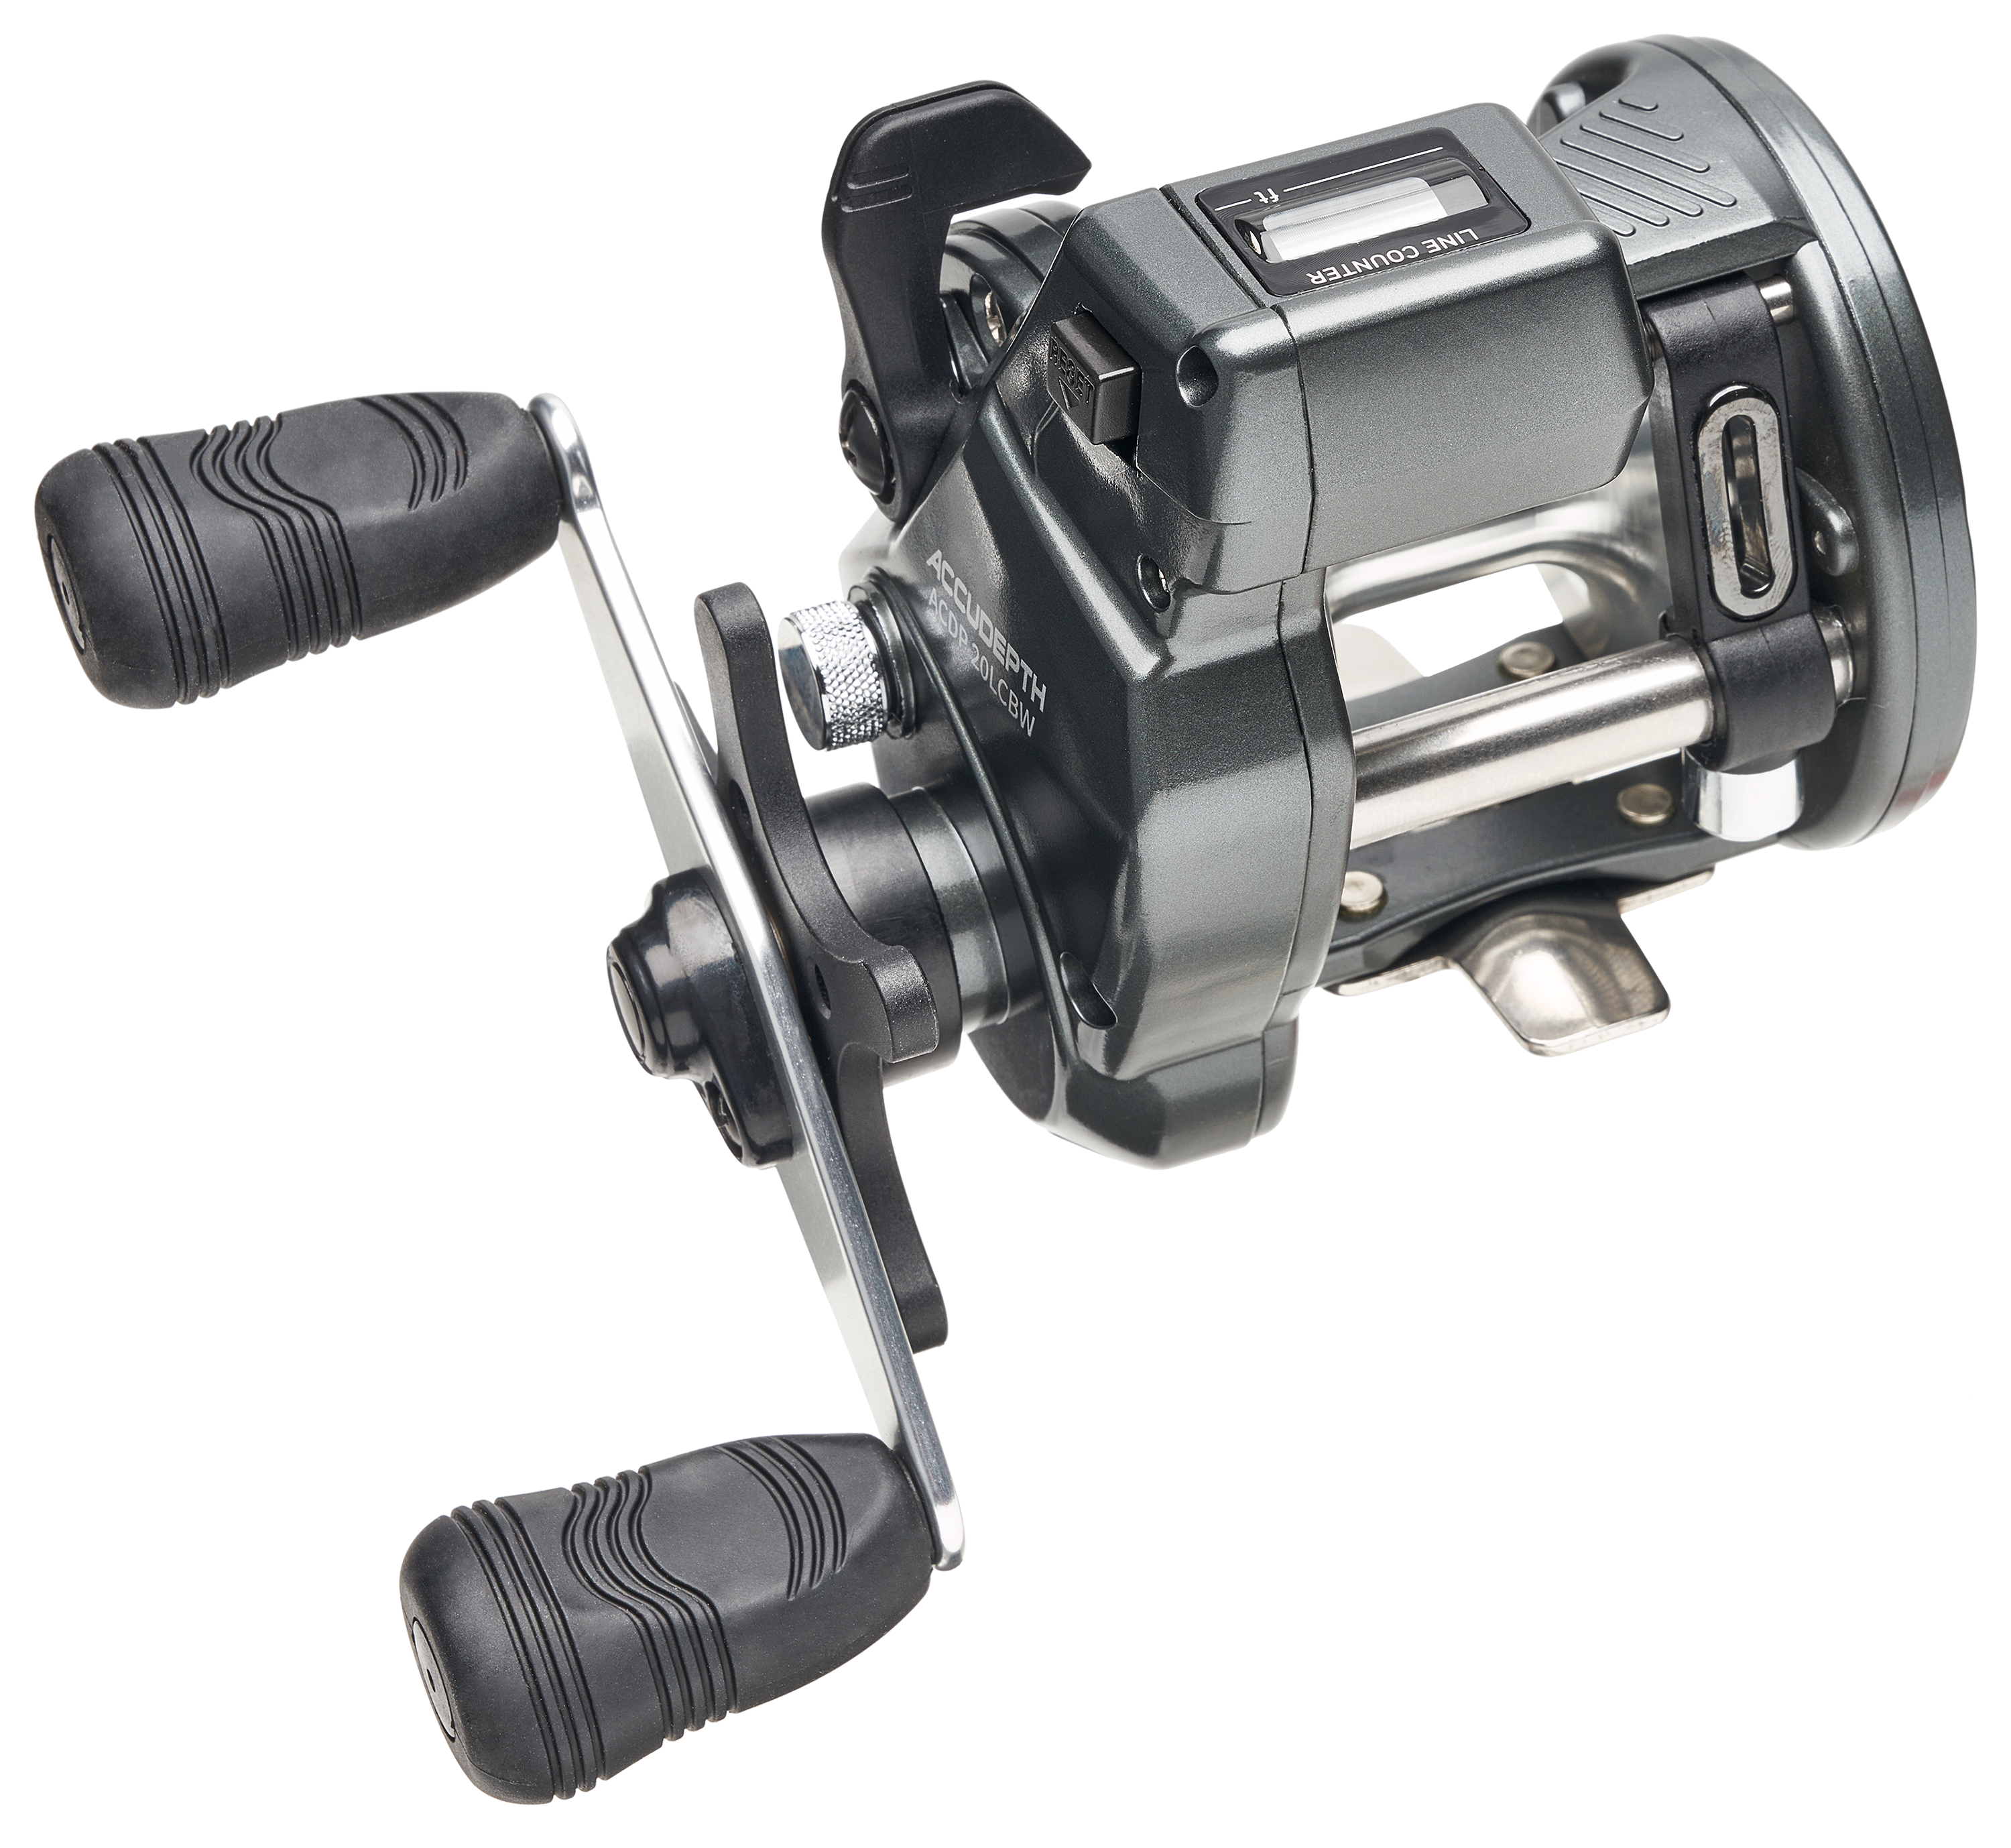  Daiwa Accudepth Plus-B Line Counter Levelwind Fishing Reel  (Silver, 47) : Spinning Fishing Reels : Sports & Outdoors